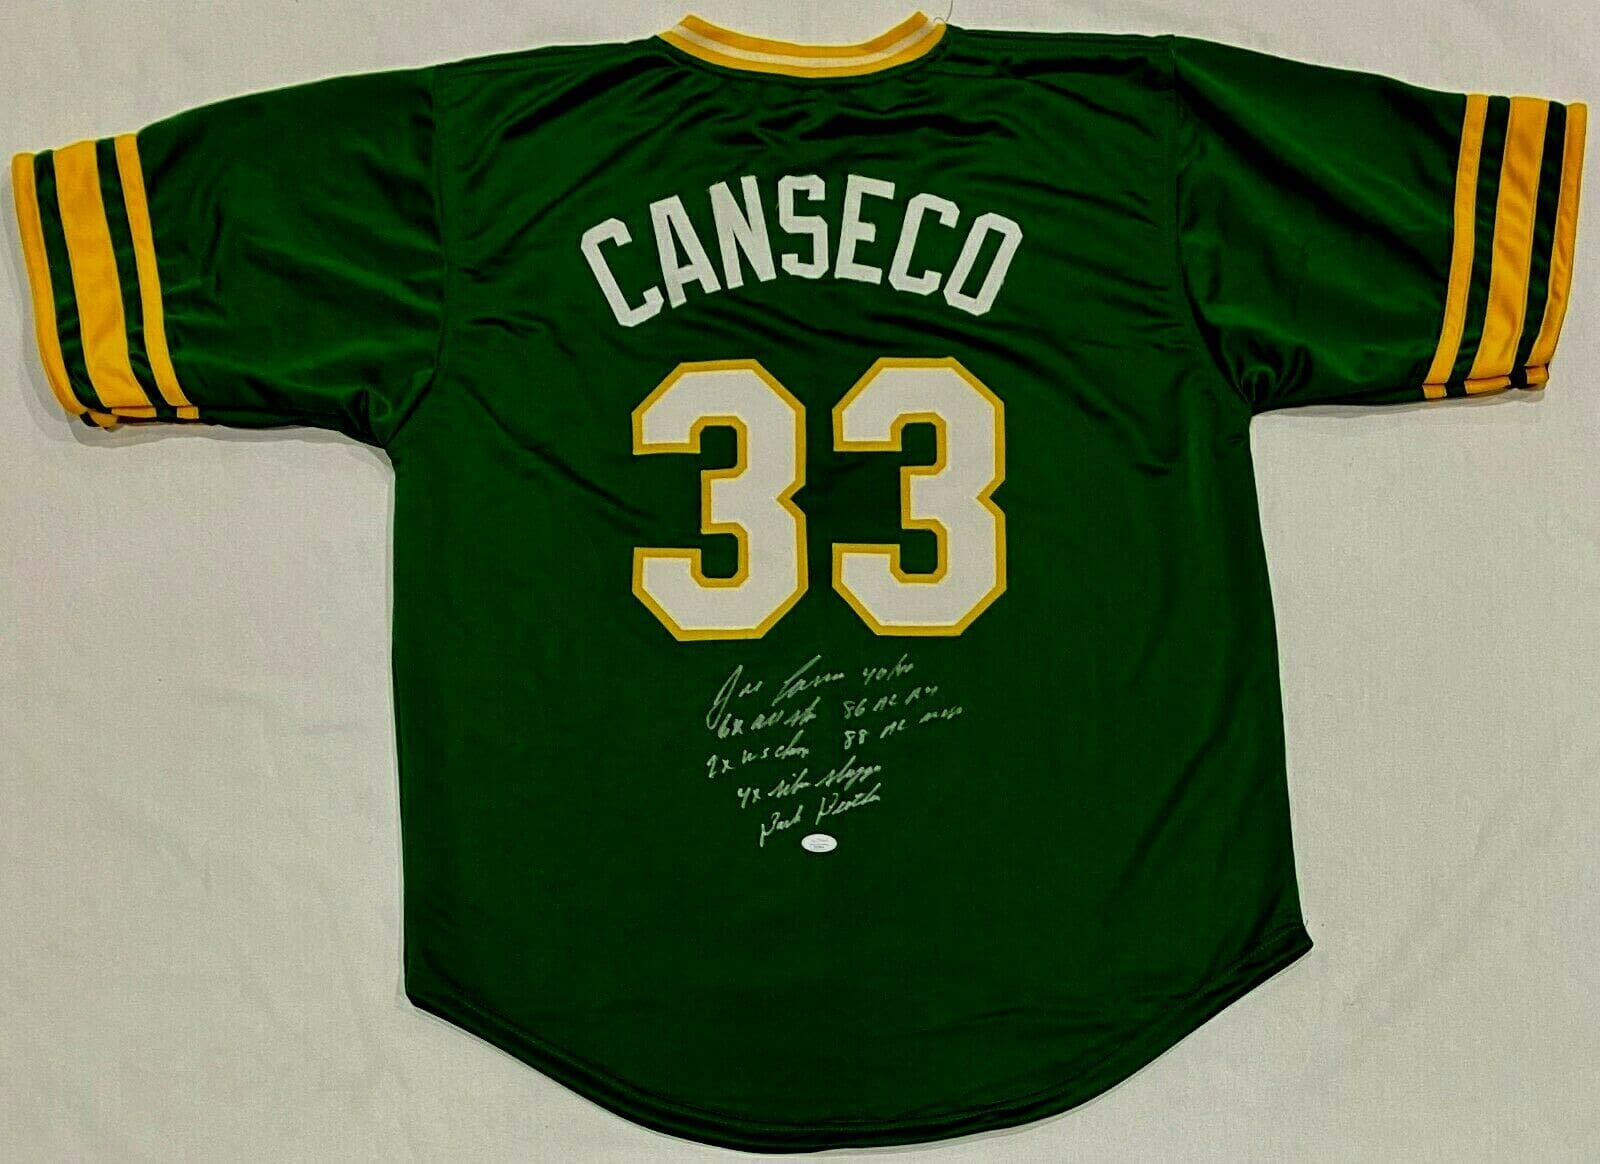 Jose Canseco Autographed Pro Style Texas Baseball Jersey Blue 